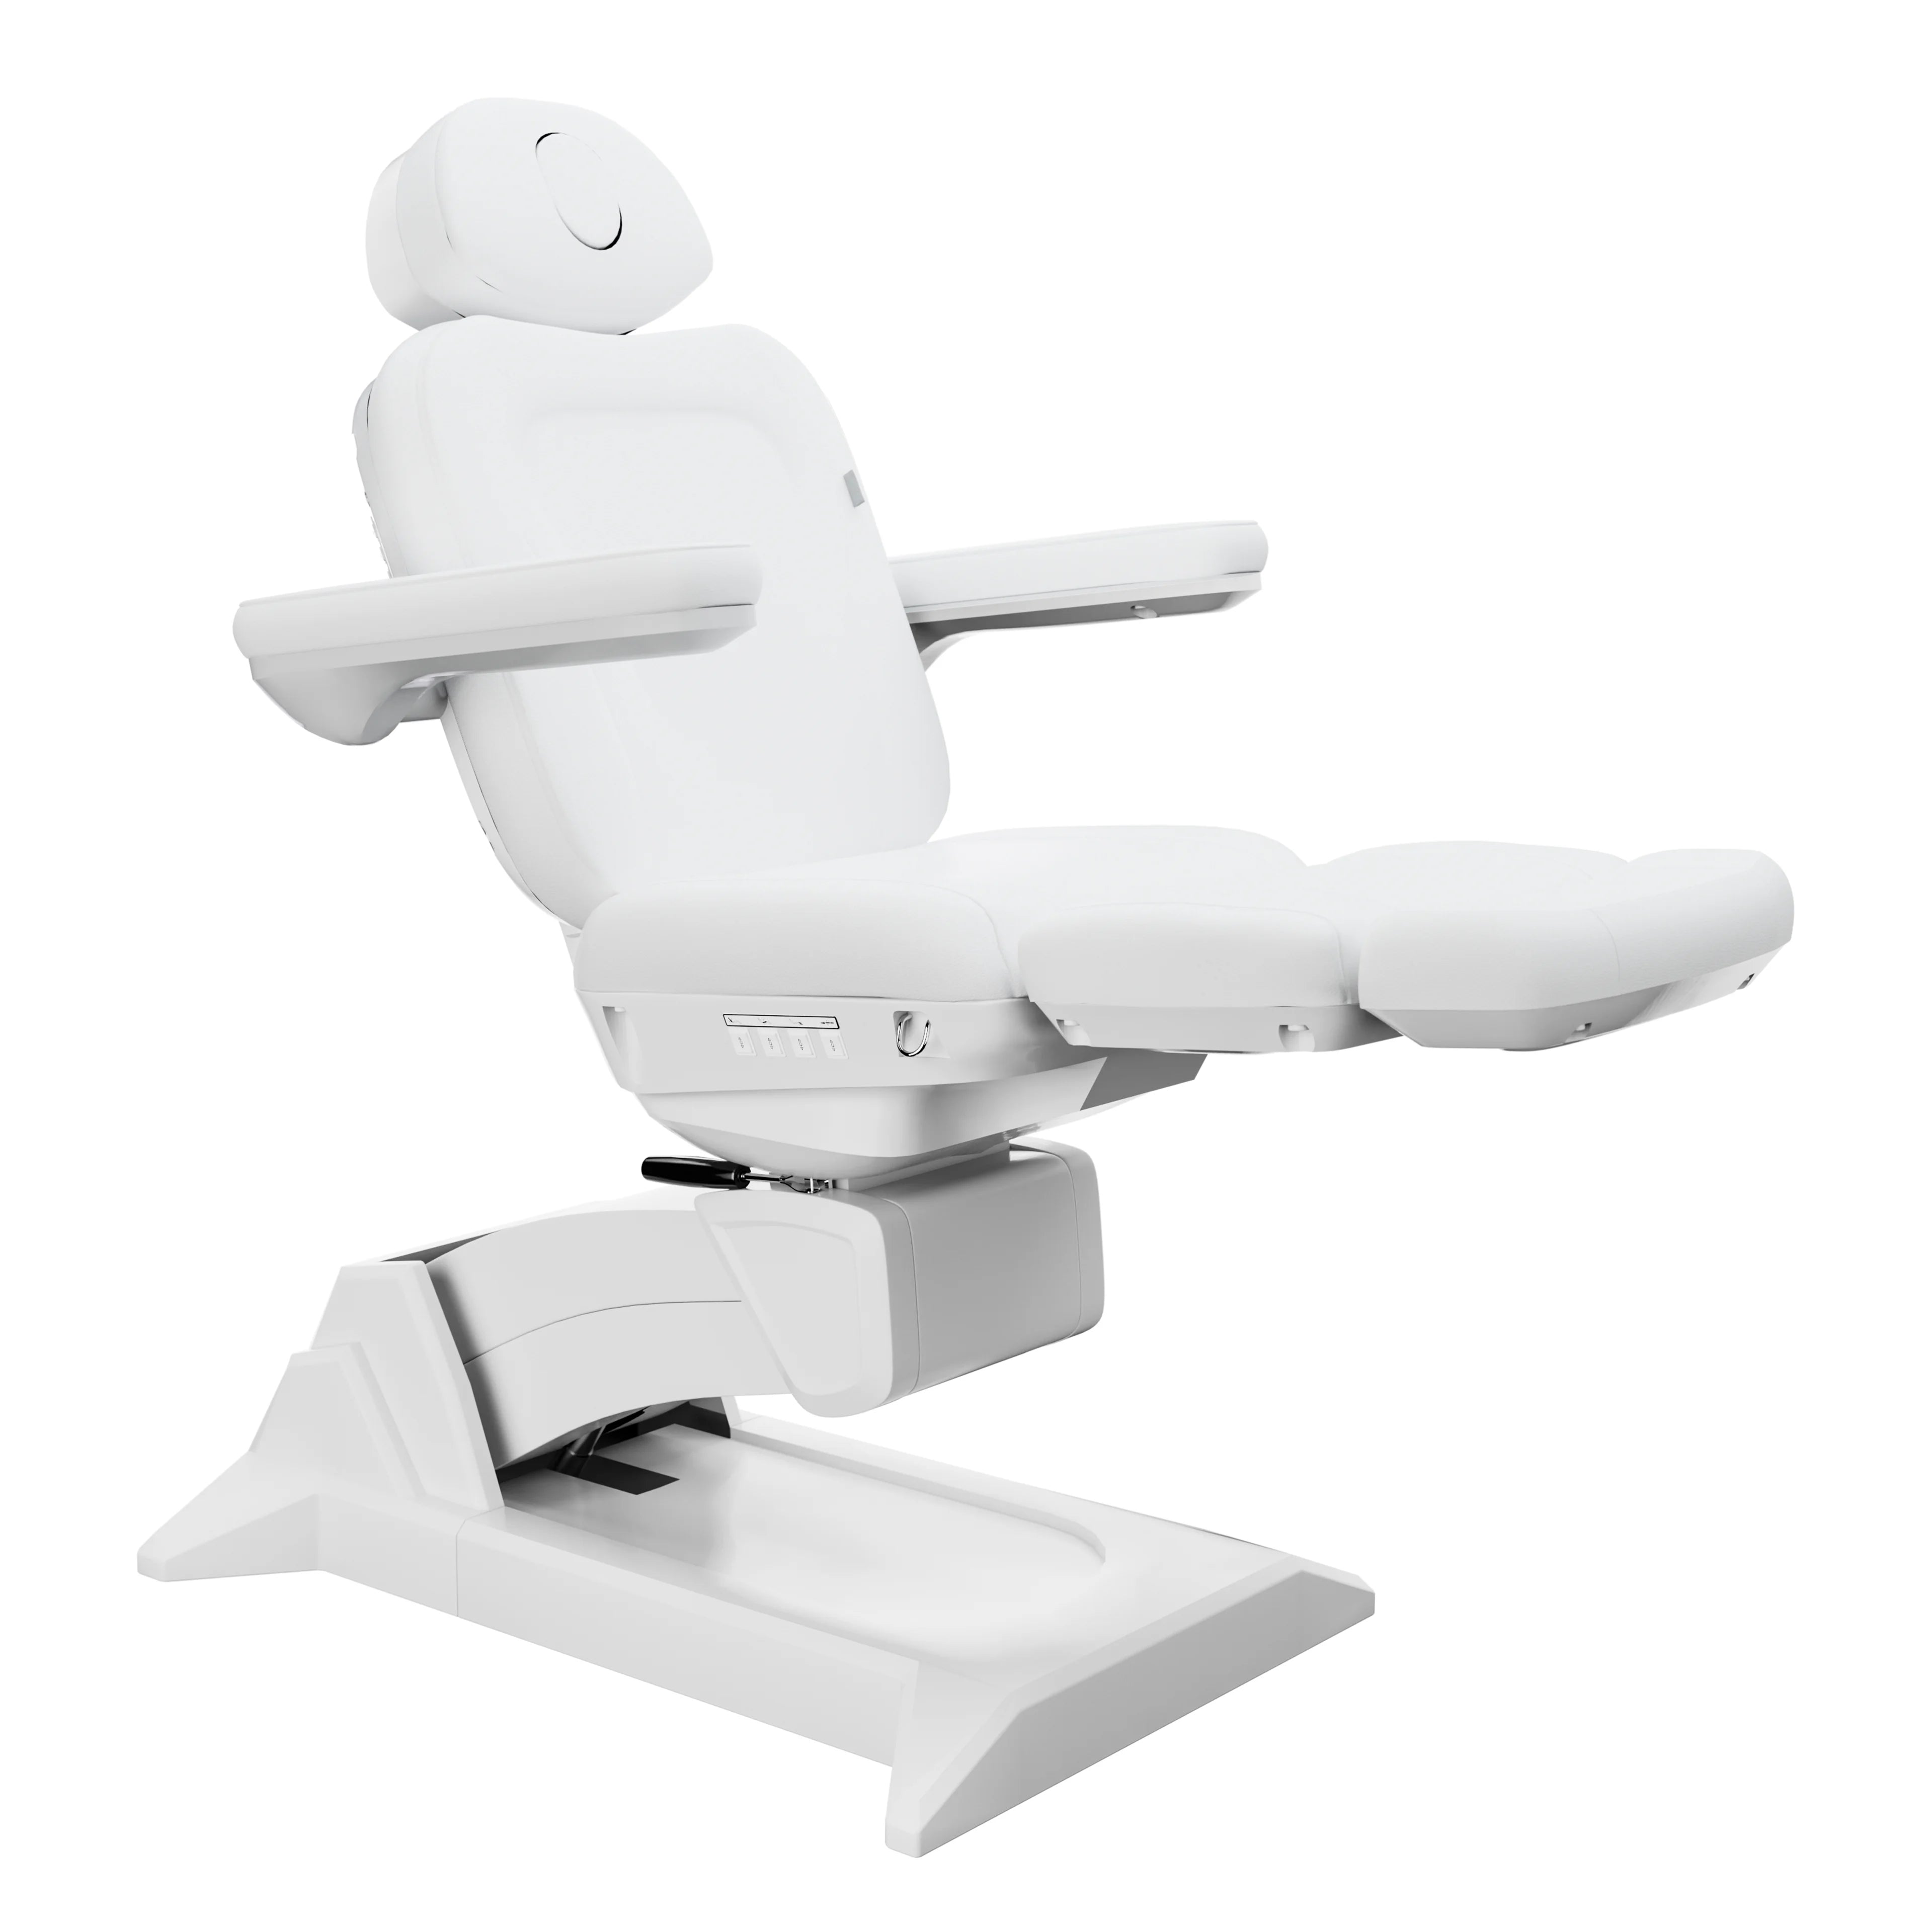 SpaMarc . Ultera (White) . Rotating . 4 Motor Spa Treatment Chair/Bed